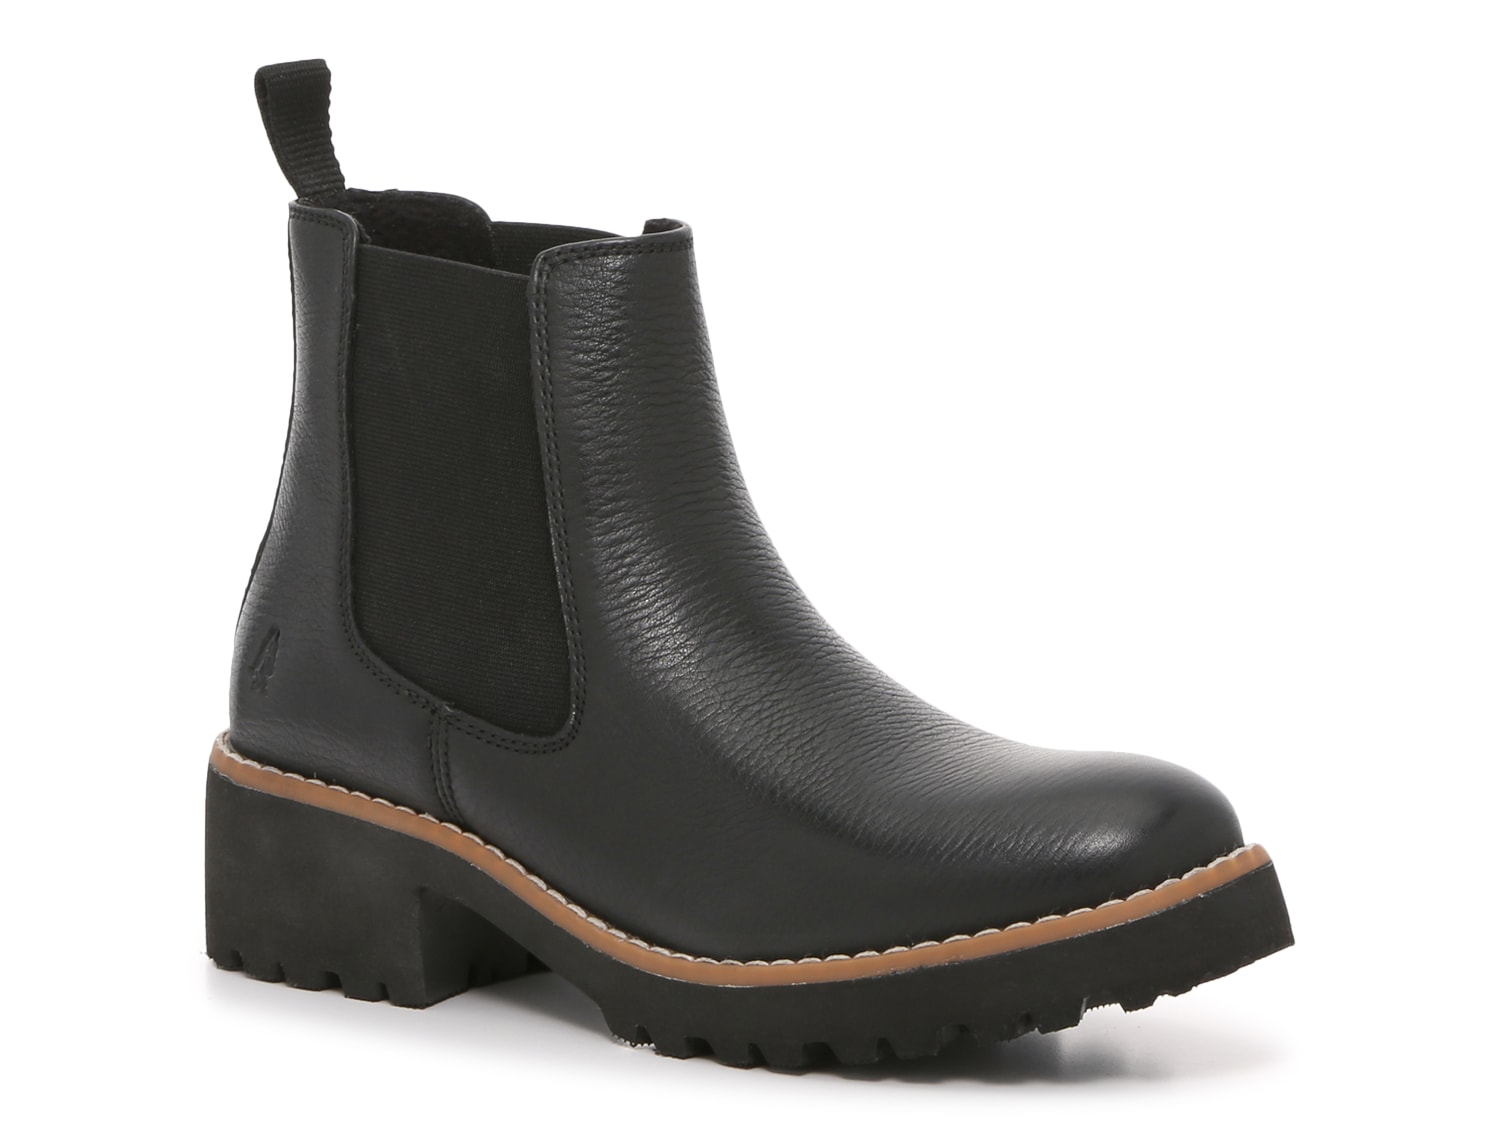 Hush Puppies Amelia Chelsea Boot - Free Shipping | DSW